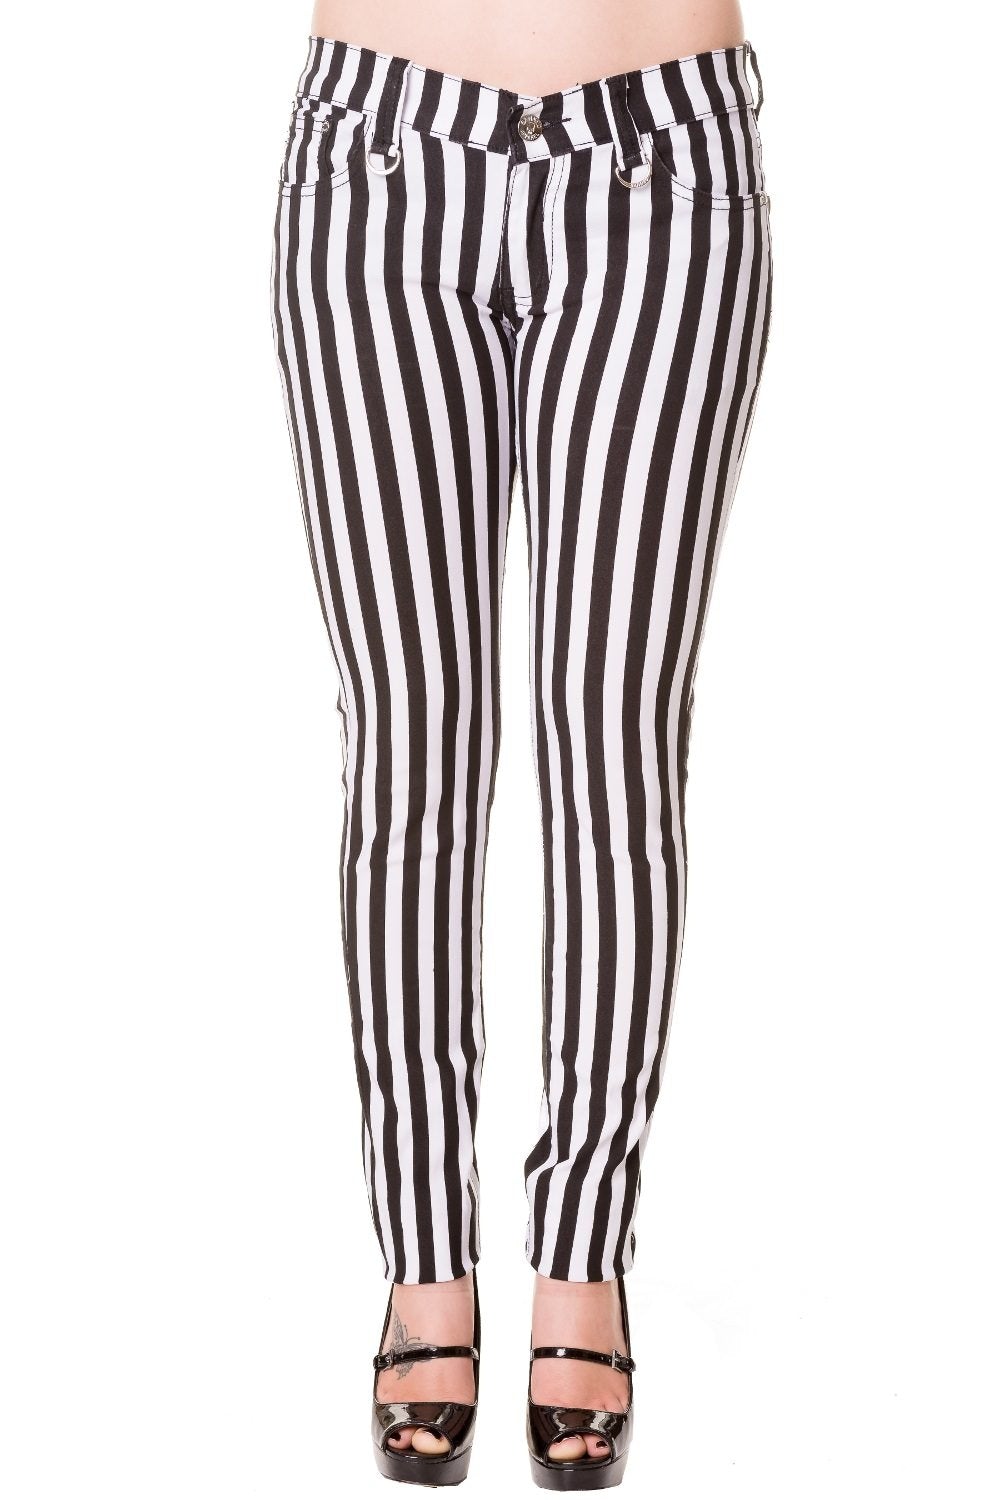 Emo Skinny Jeans Striped Red White Black by Banned Alternative – Banned ...